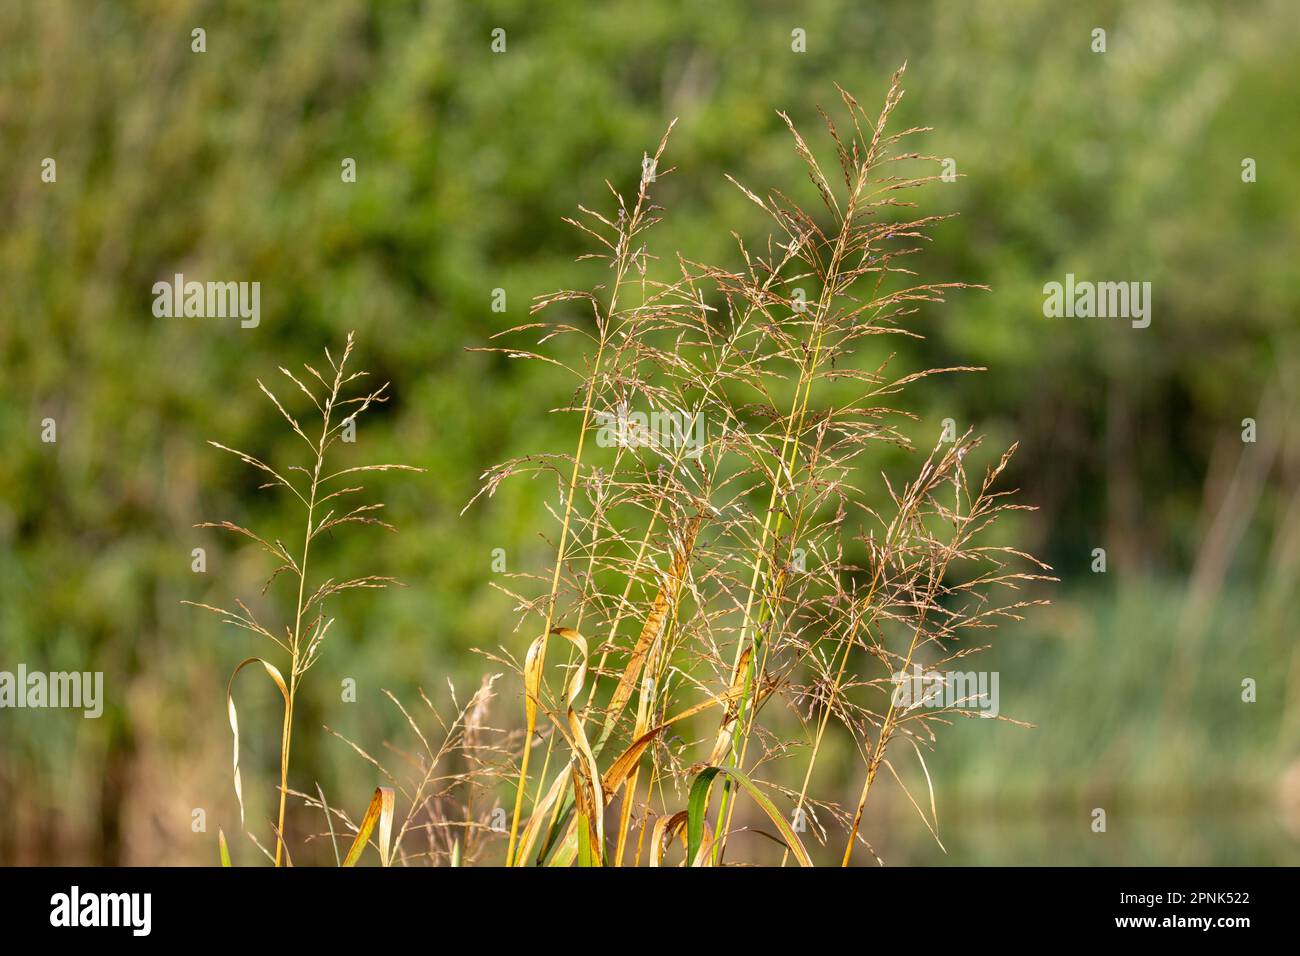 multiple grass flower head isolated on a natural green background Stock Photo